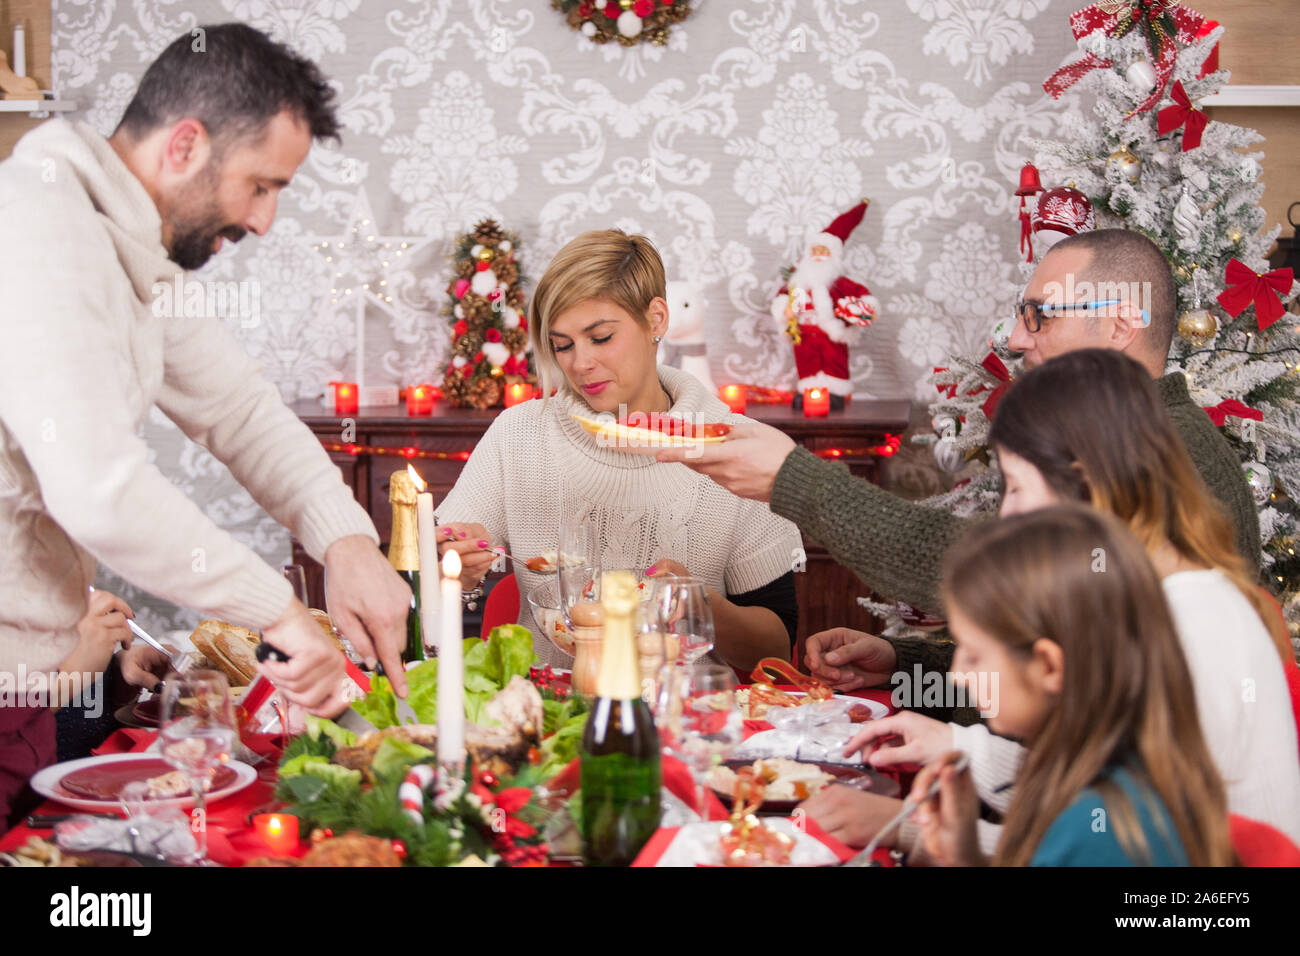 Uncle cutting turkey for family on christmas dinner. Beautiful home decoration for christmas. Beautiful family on christmas dinner. Happines around the table on christmas eve. Stock Photo